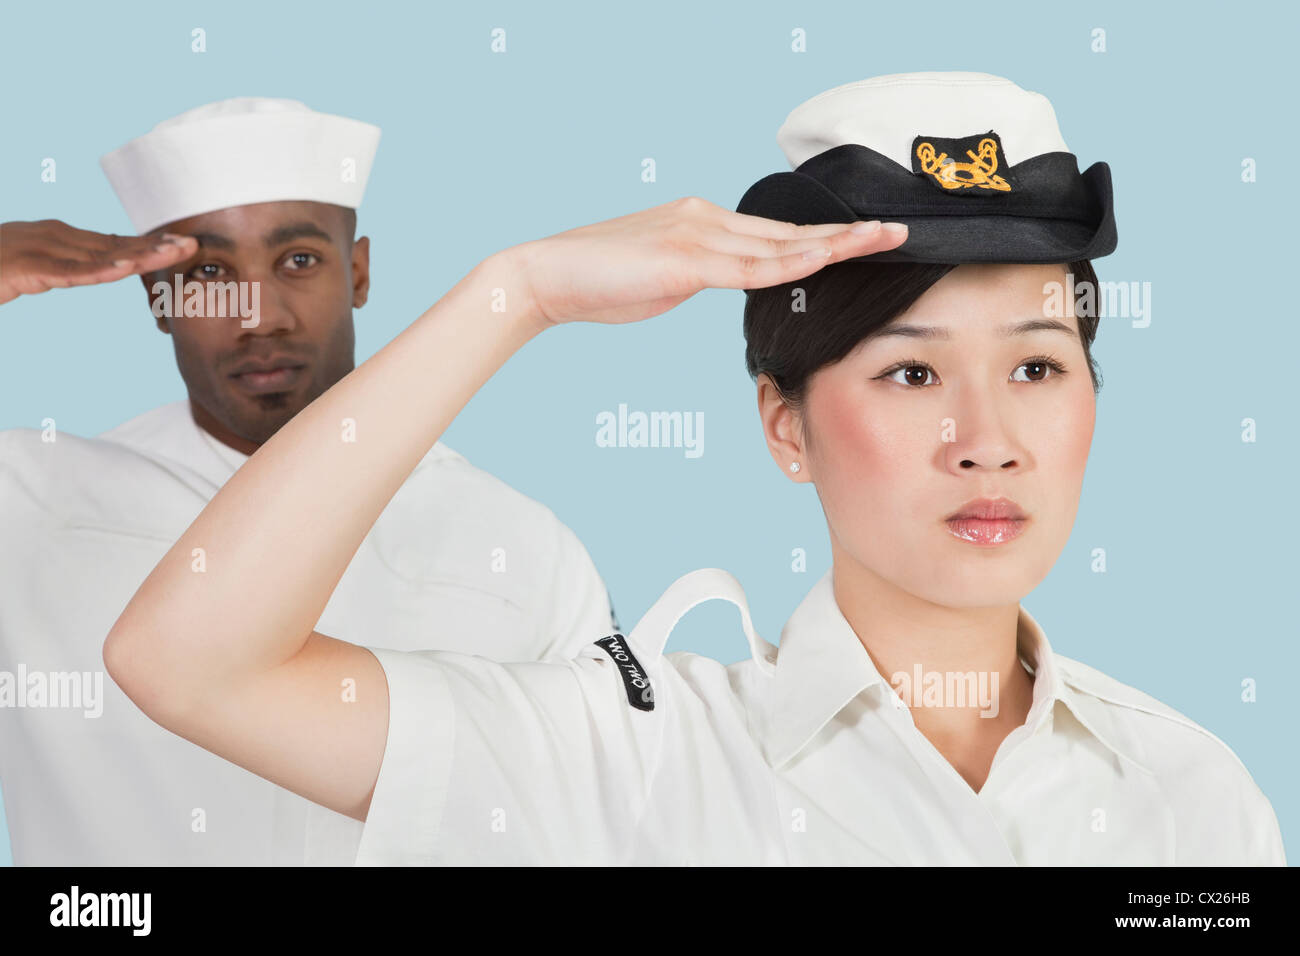 Portrait of serious female US Navy officer and male sailor saluting over light blue background Stock Photo